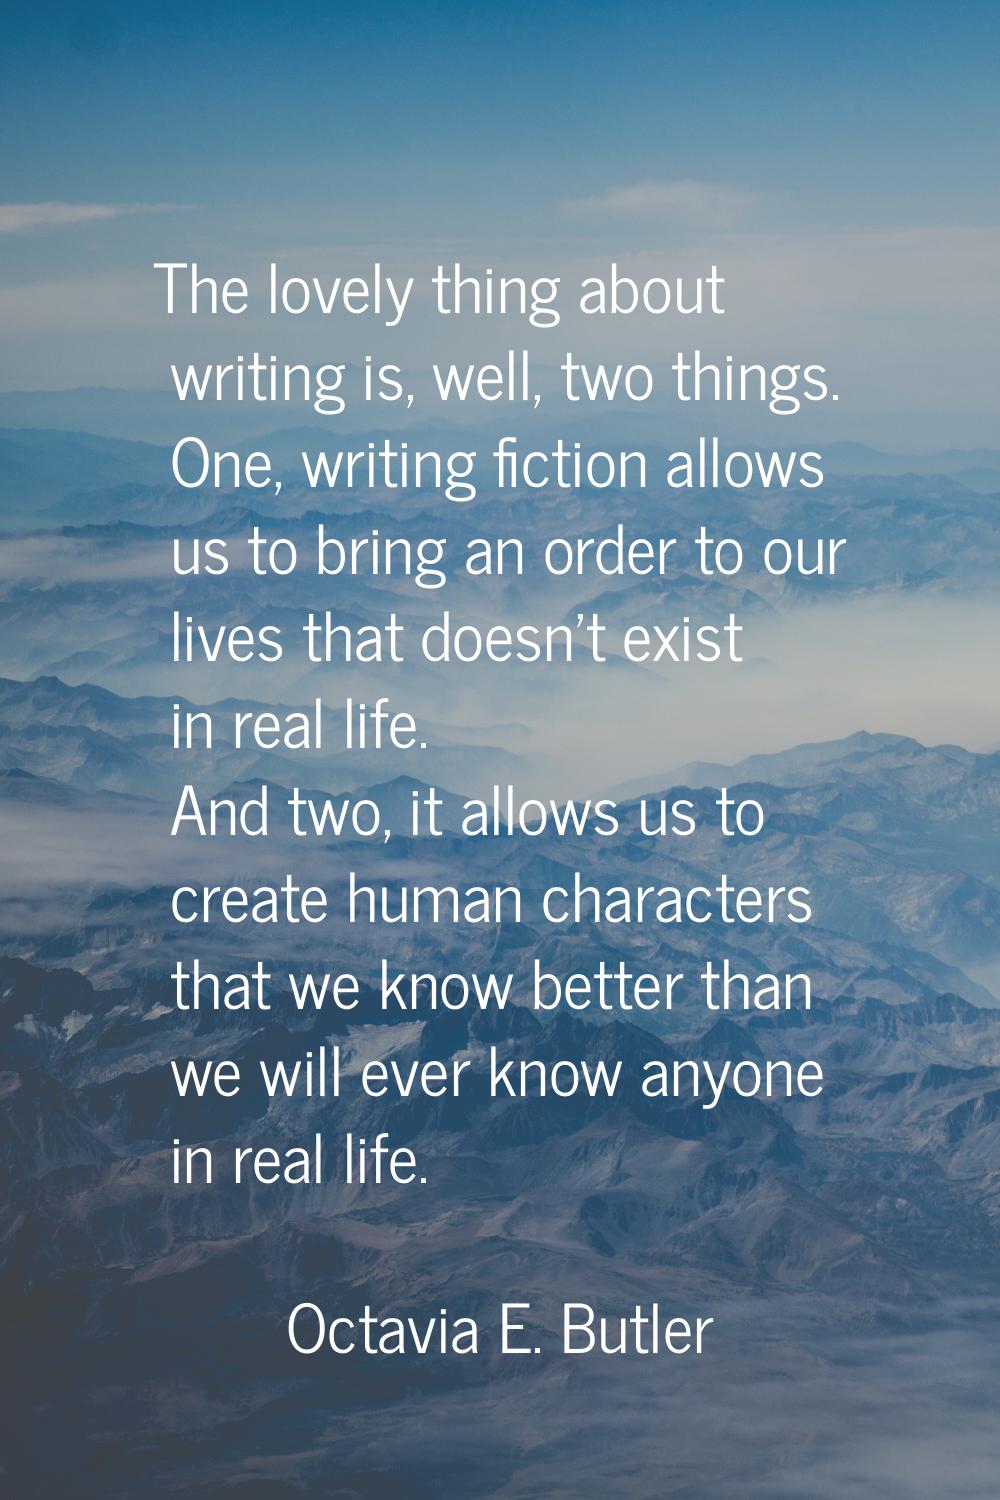 The lovely thing about writing is, well, two things. One, writing fiction allows us to bring an ord